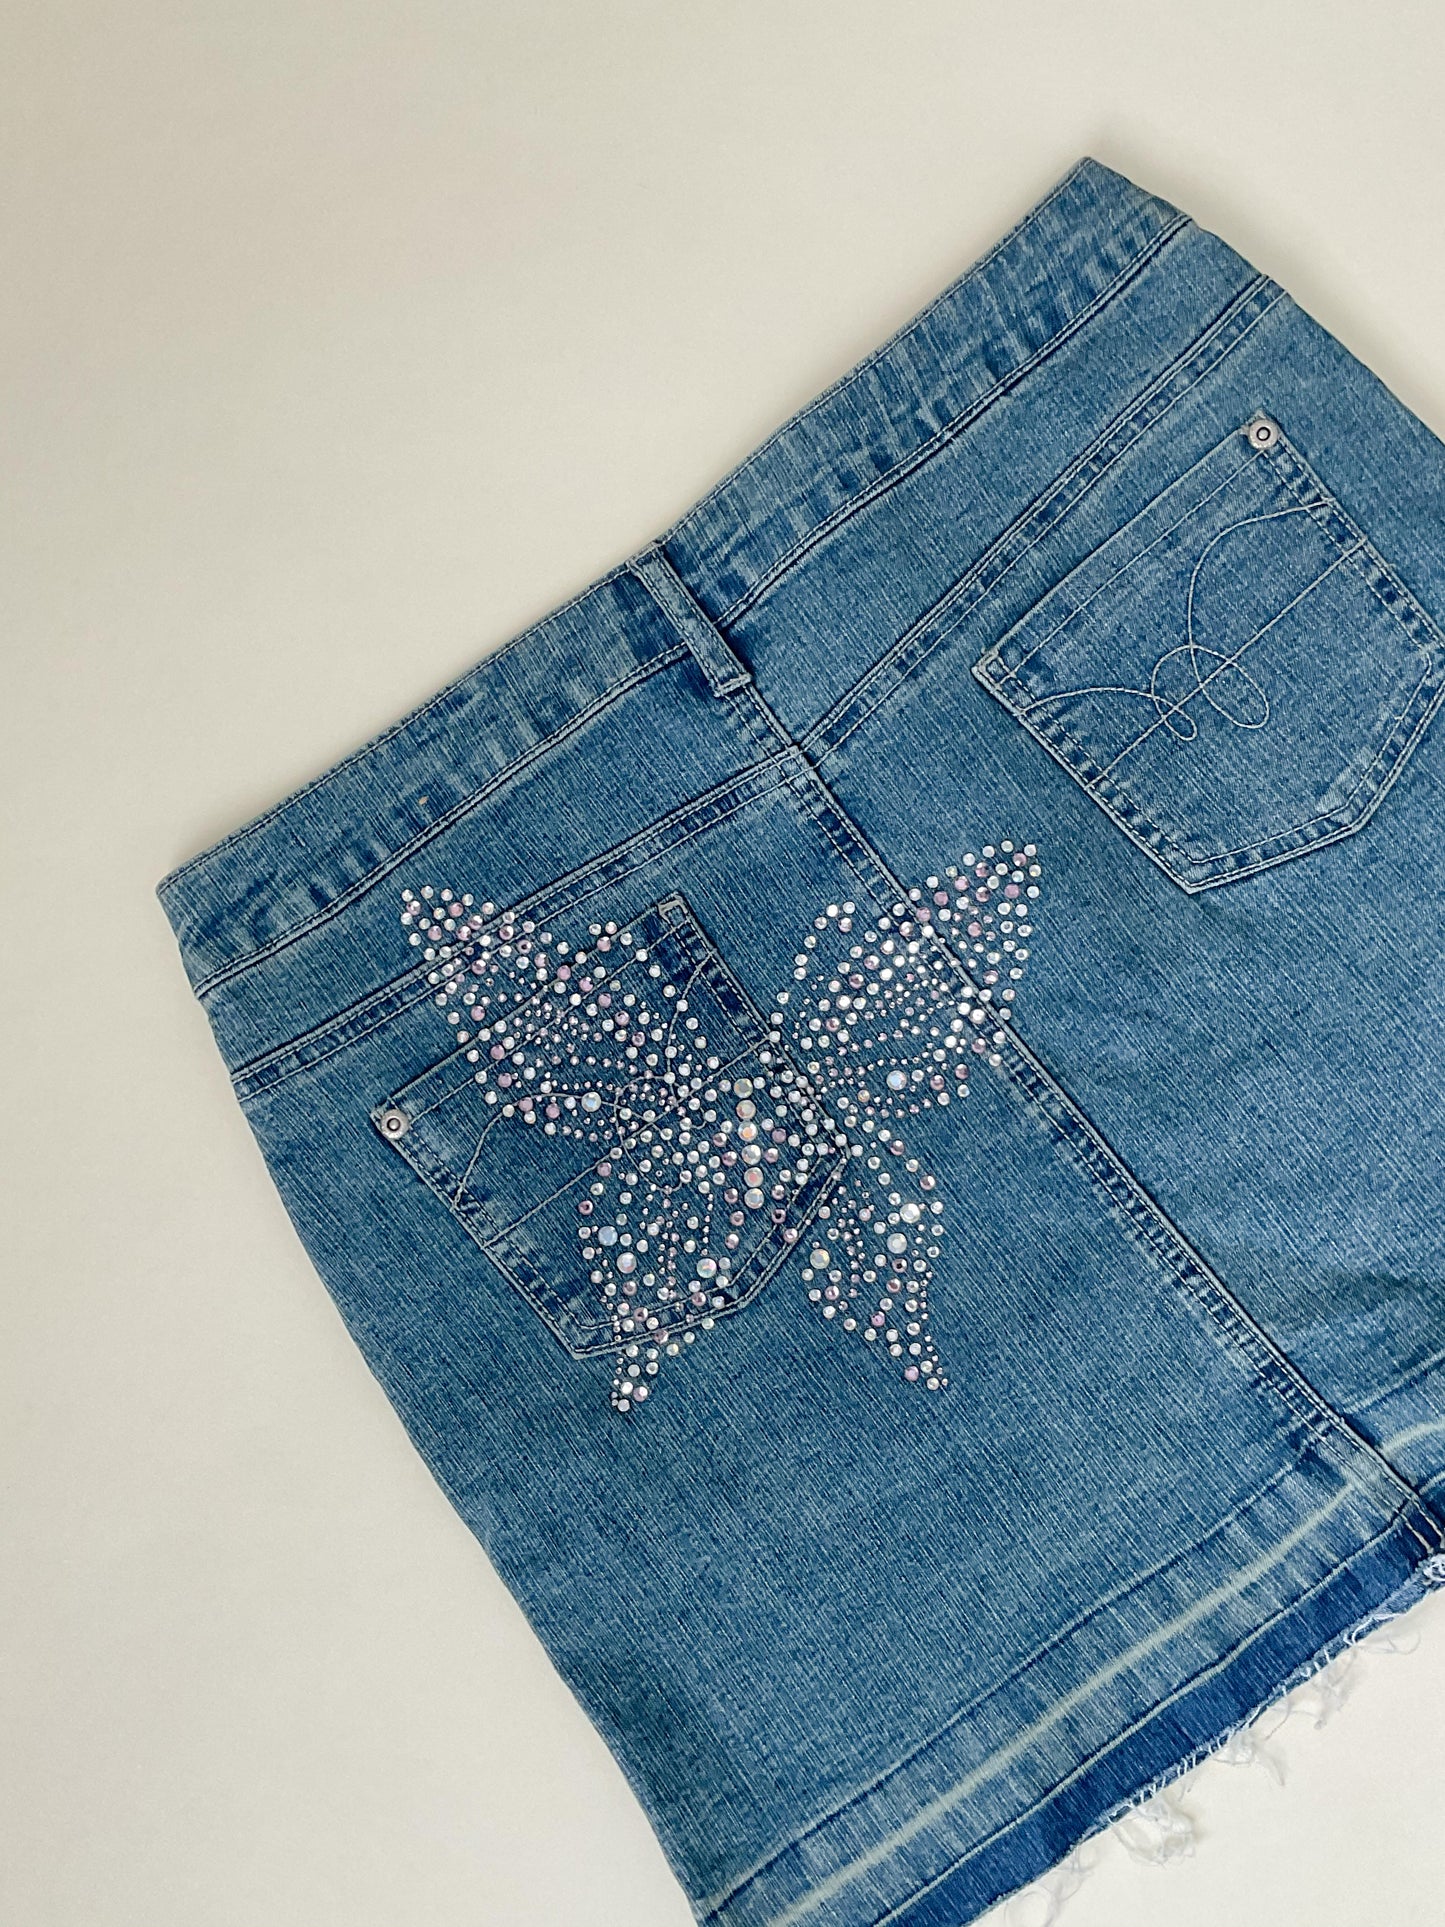 y2k bedazzles Butterfly Skirt